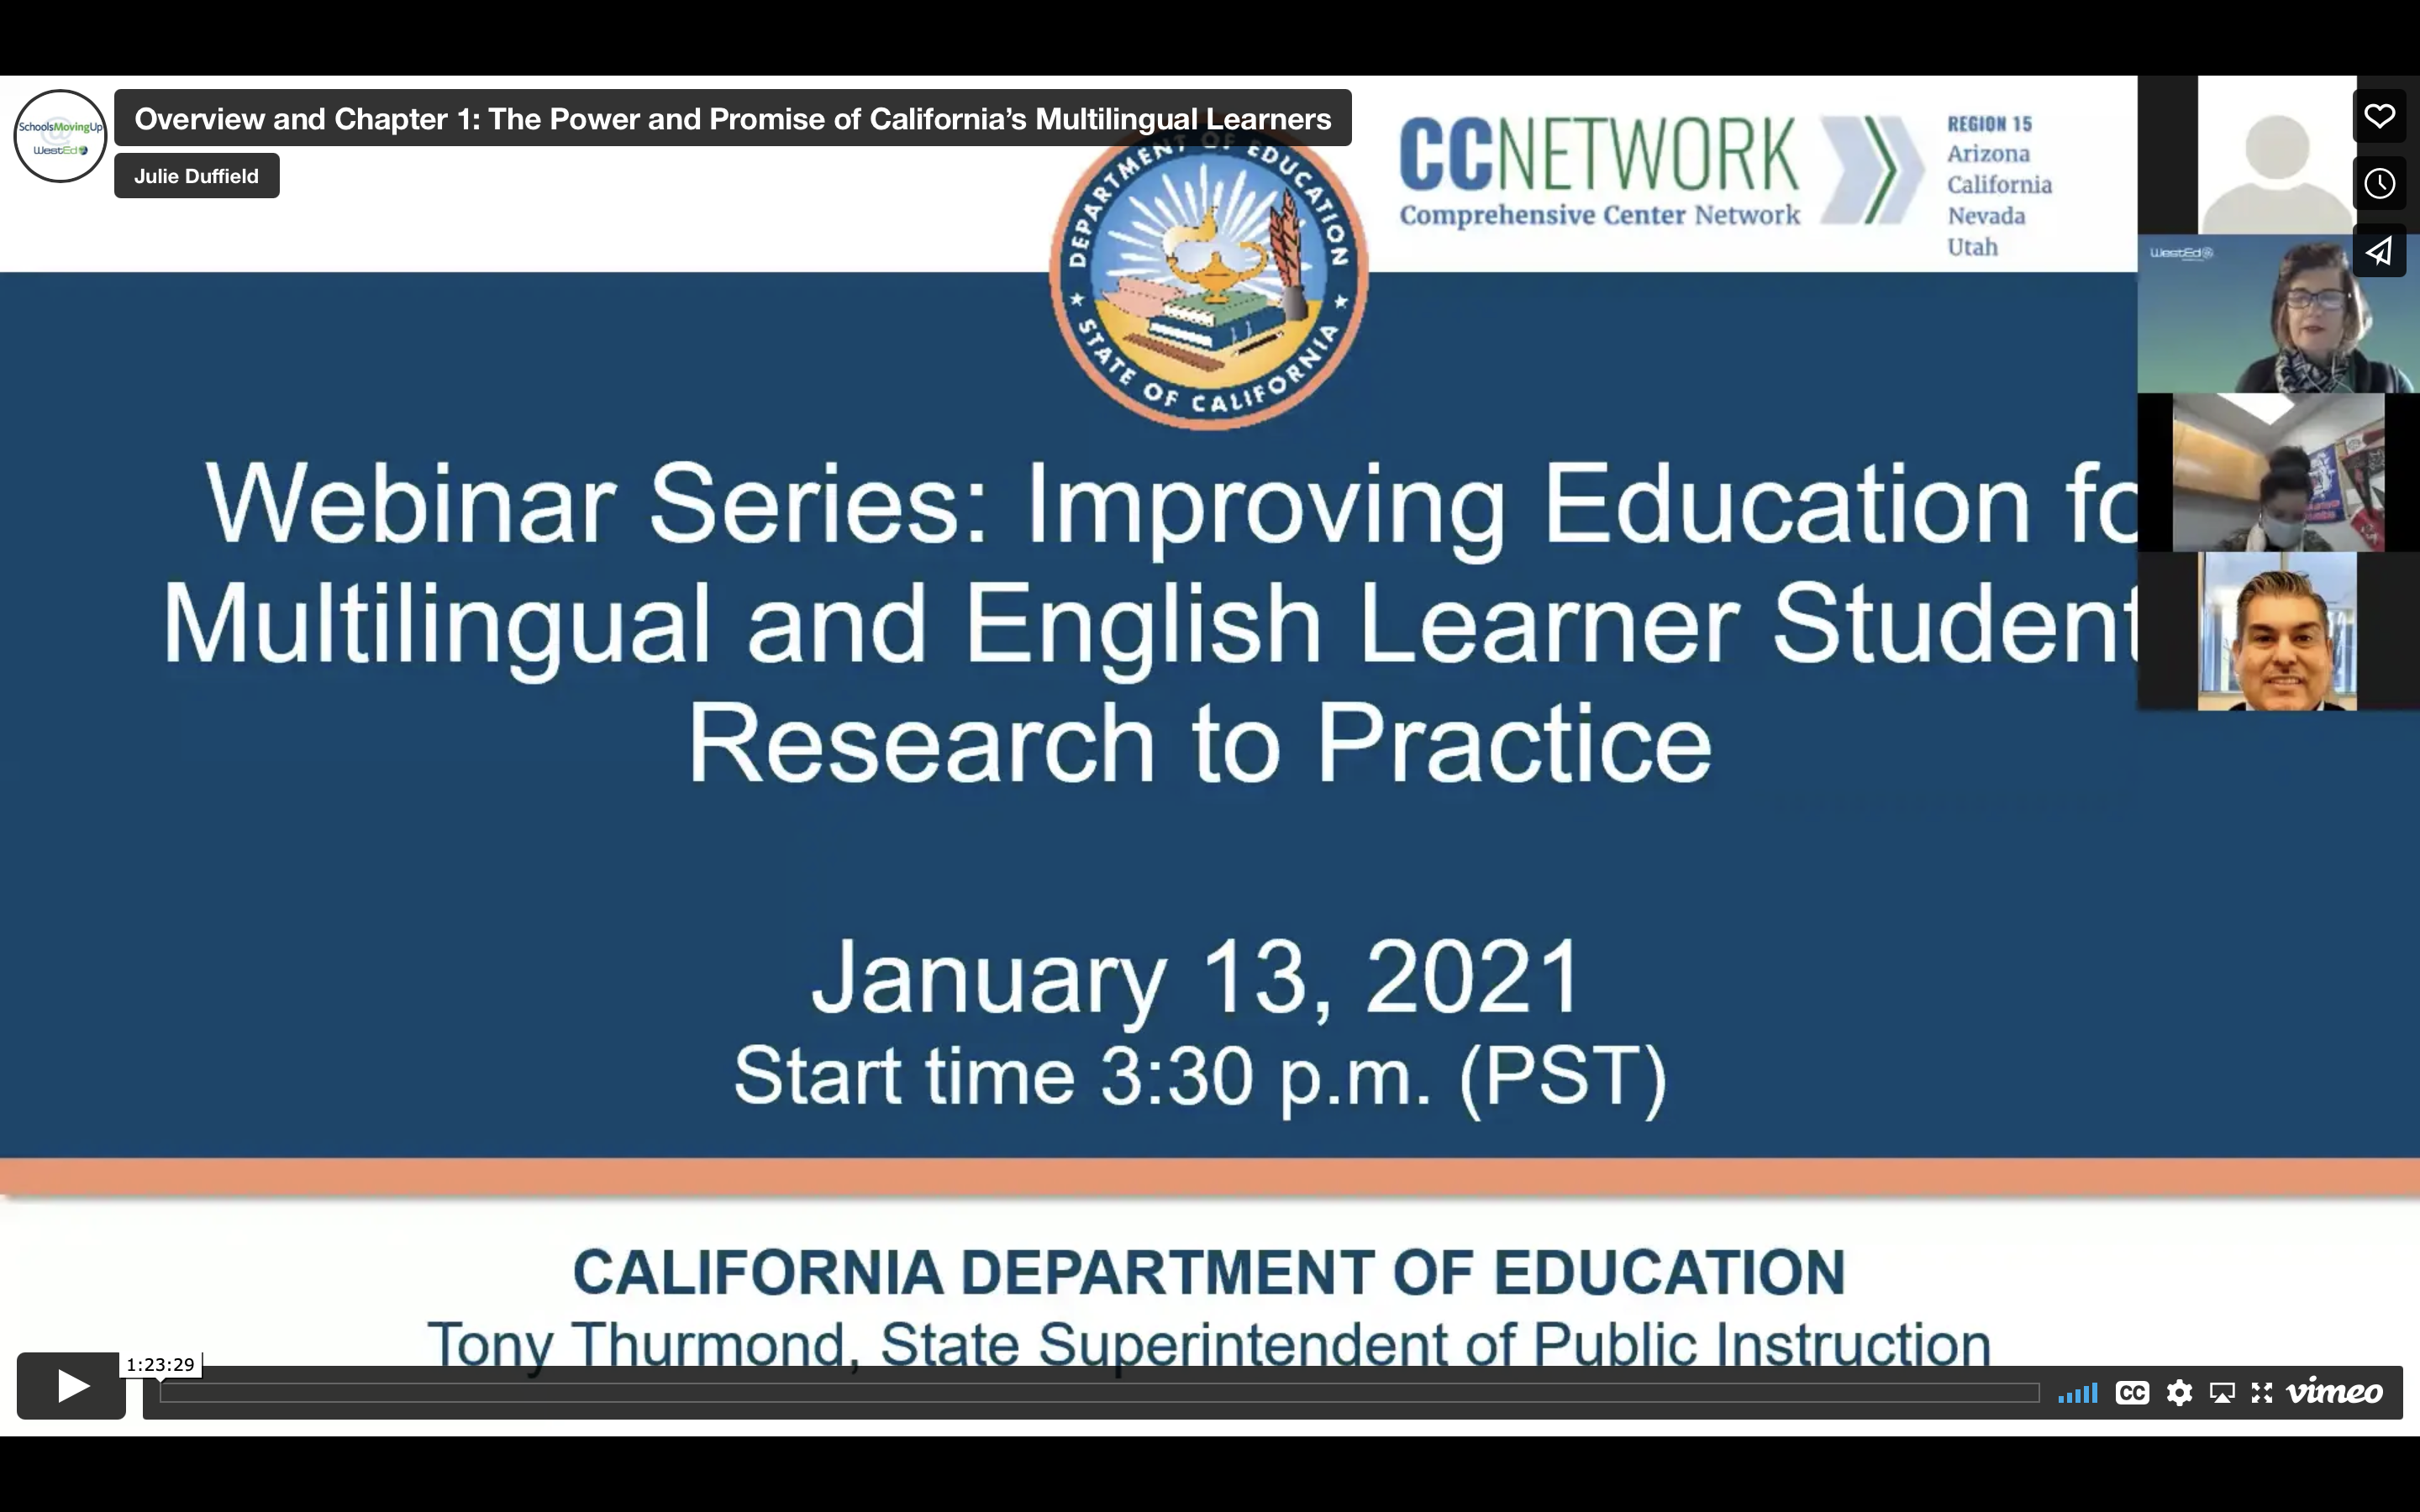 Improving Education for Multilingual and English Learner Students_Research to Practice (Webinar Series)